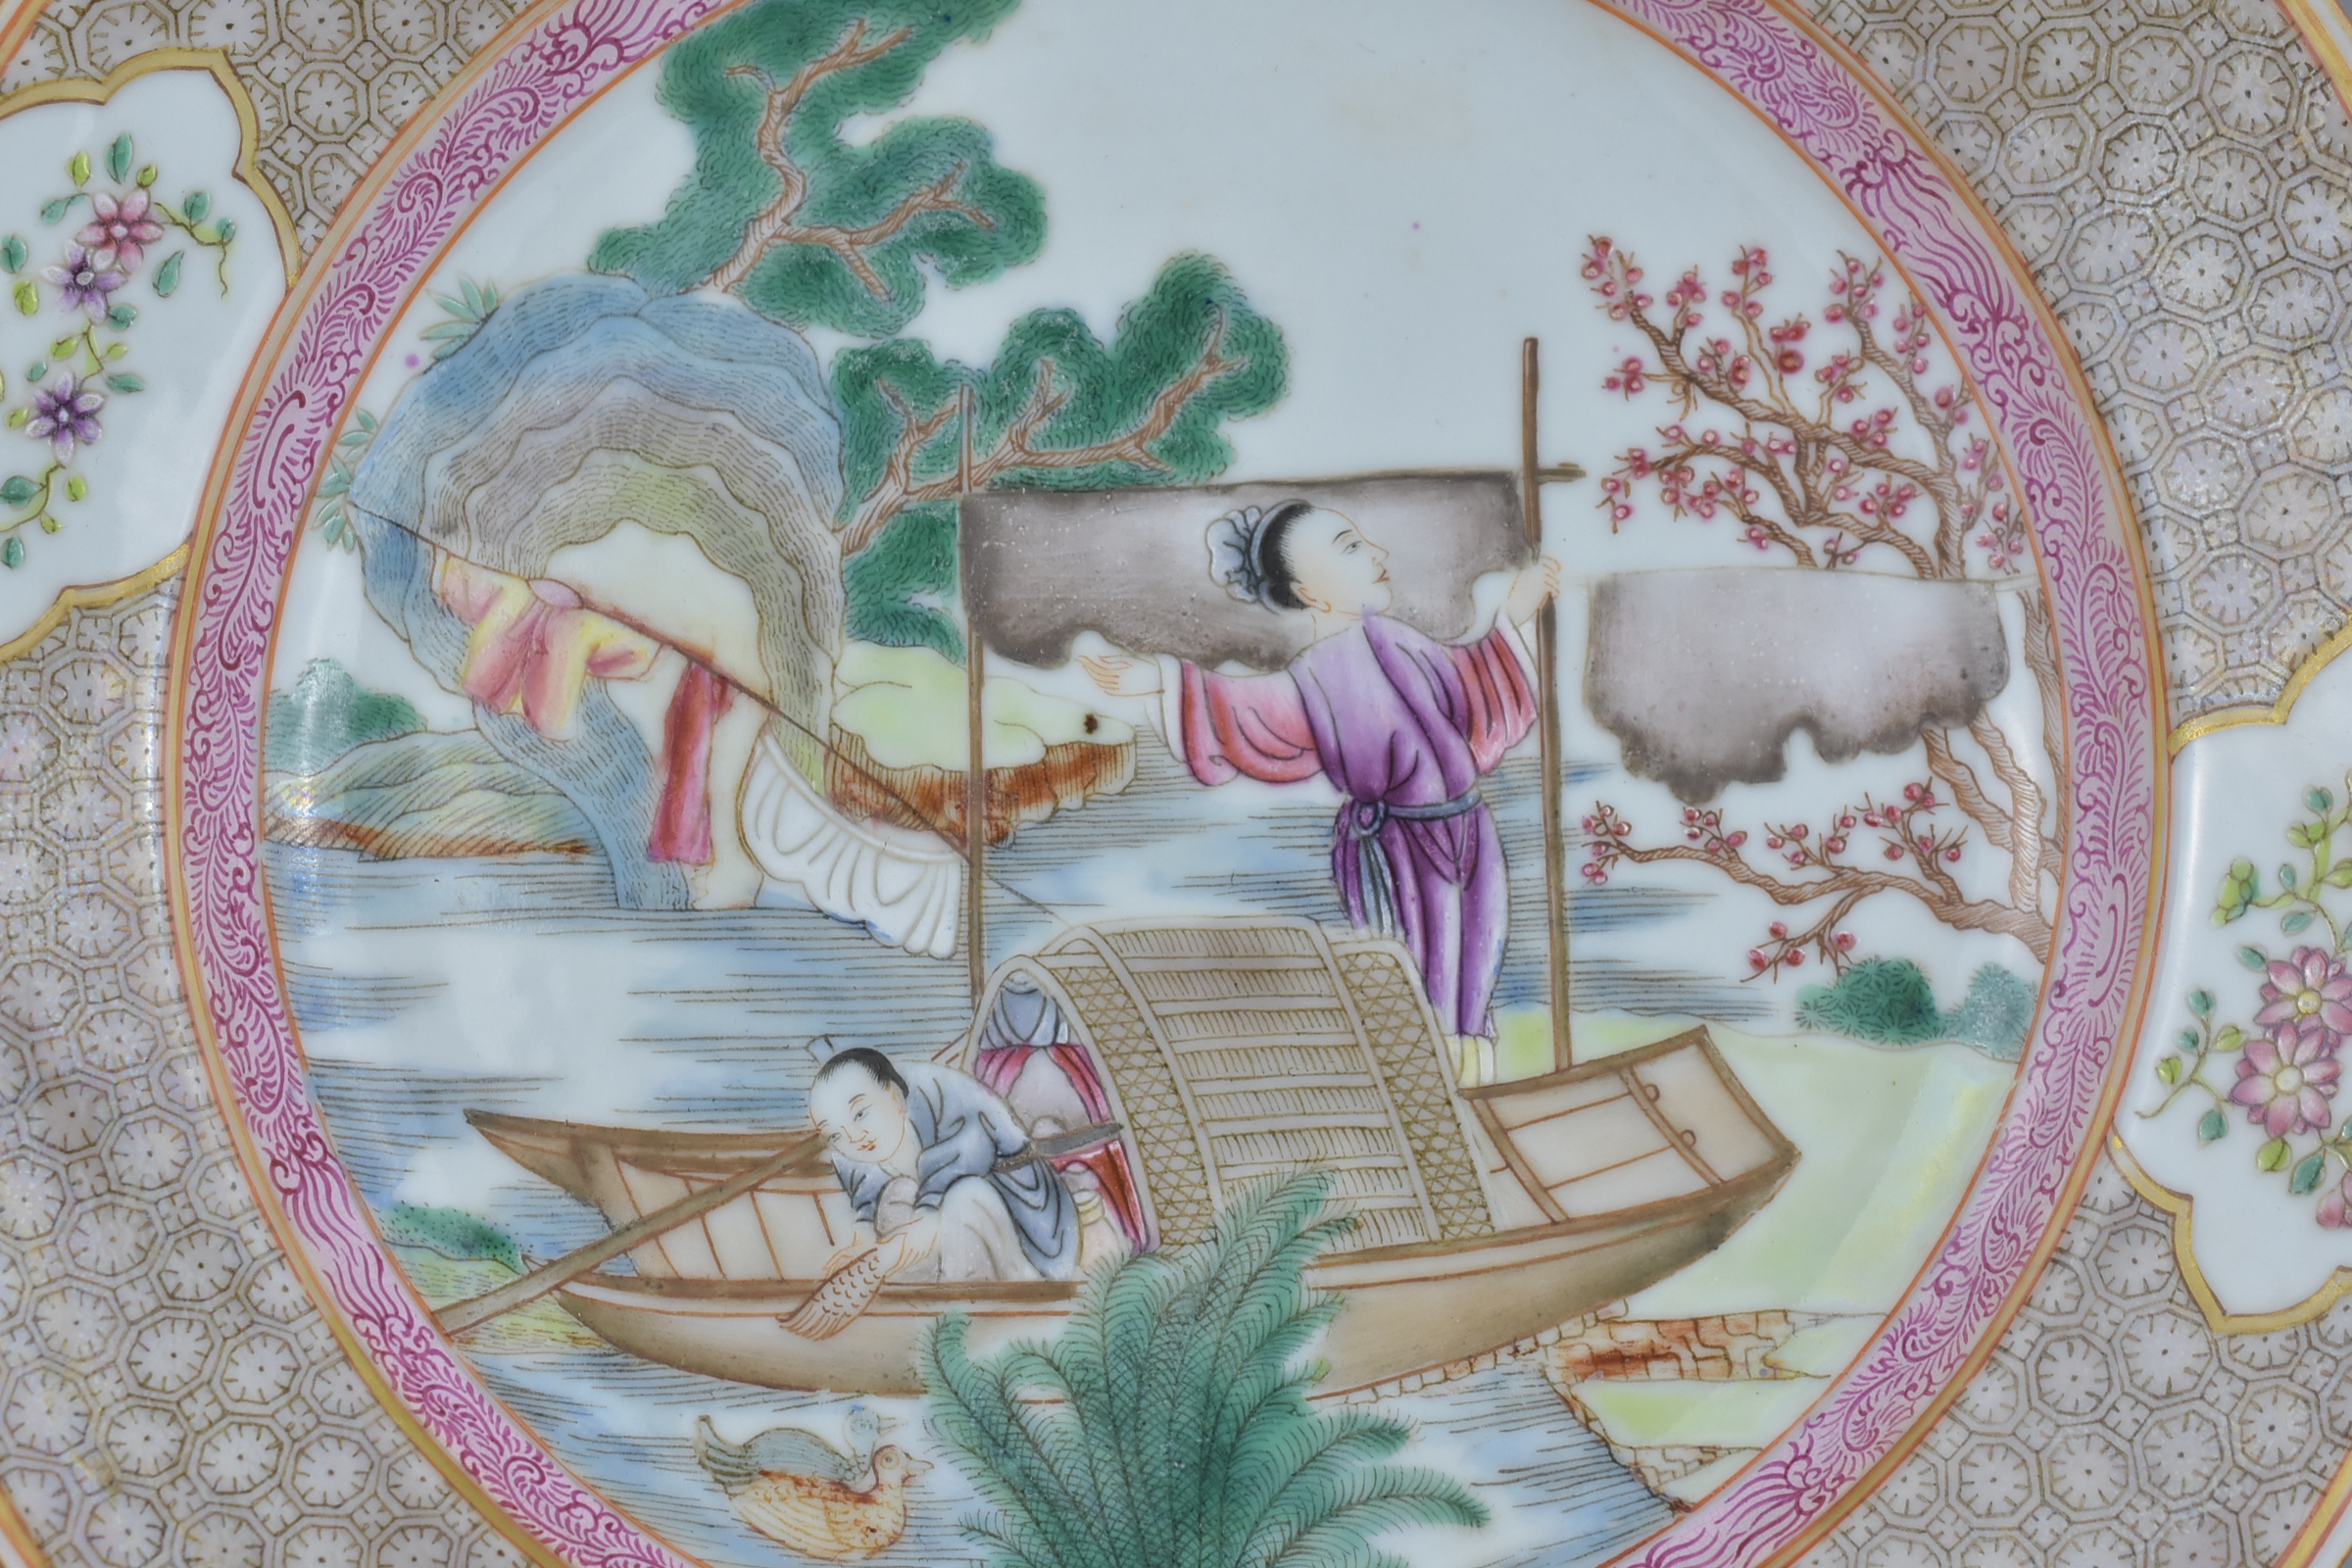 An 18th century Chinese Qianlong period Famille rose porcelain dish decorated with figures in a boat - Image 3 of 5